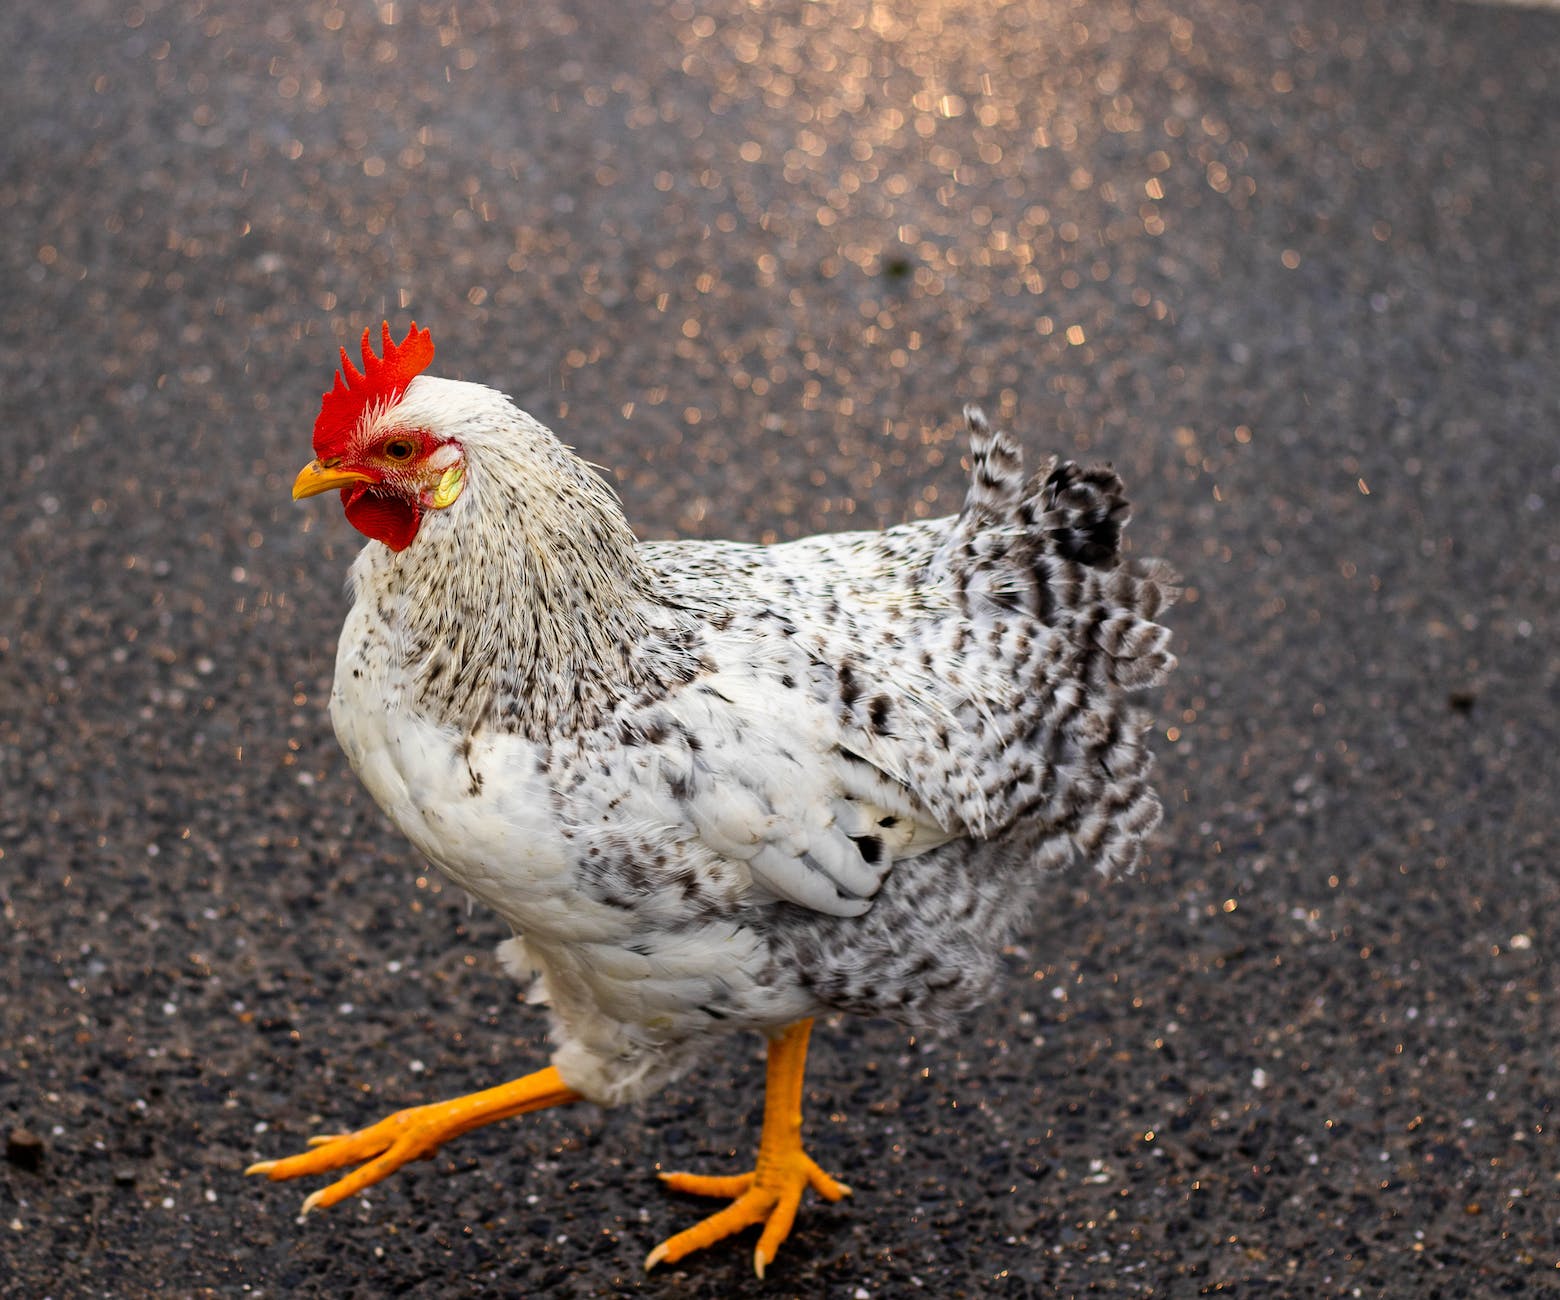 close up photo of white and black chicken on tarmac